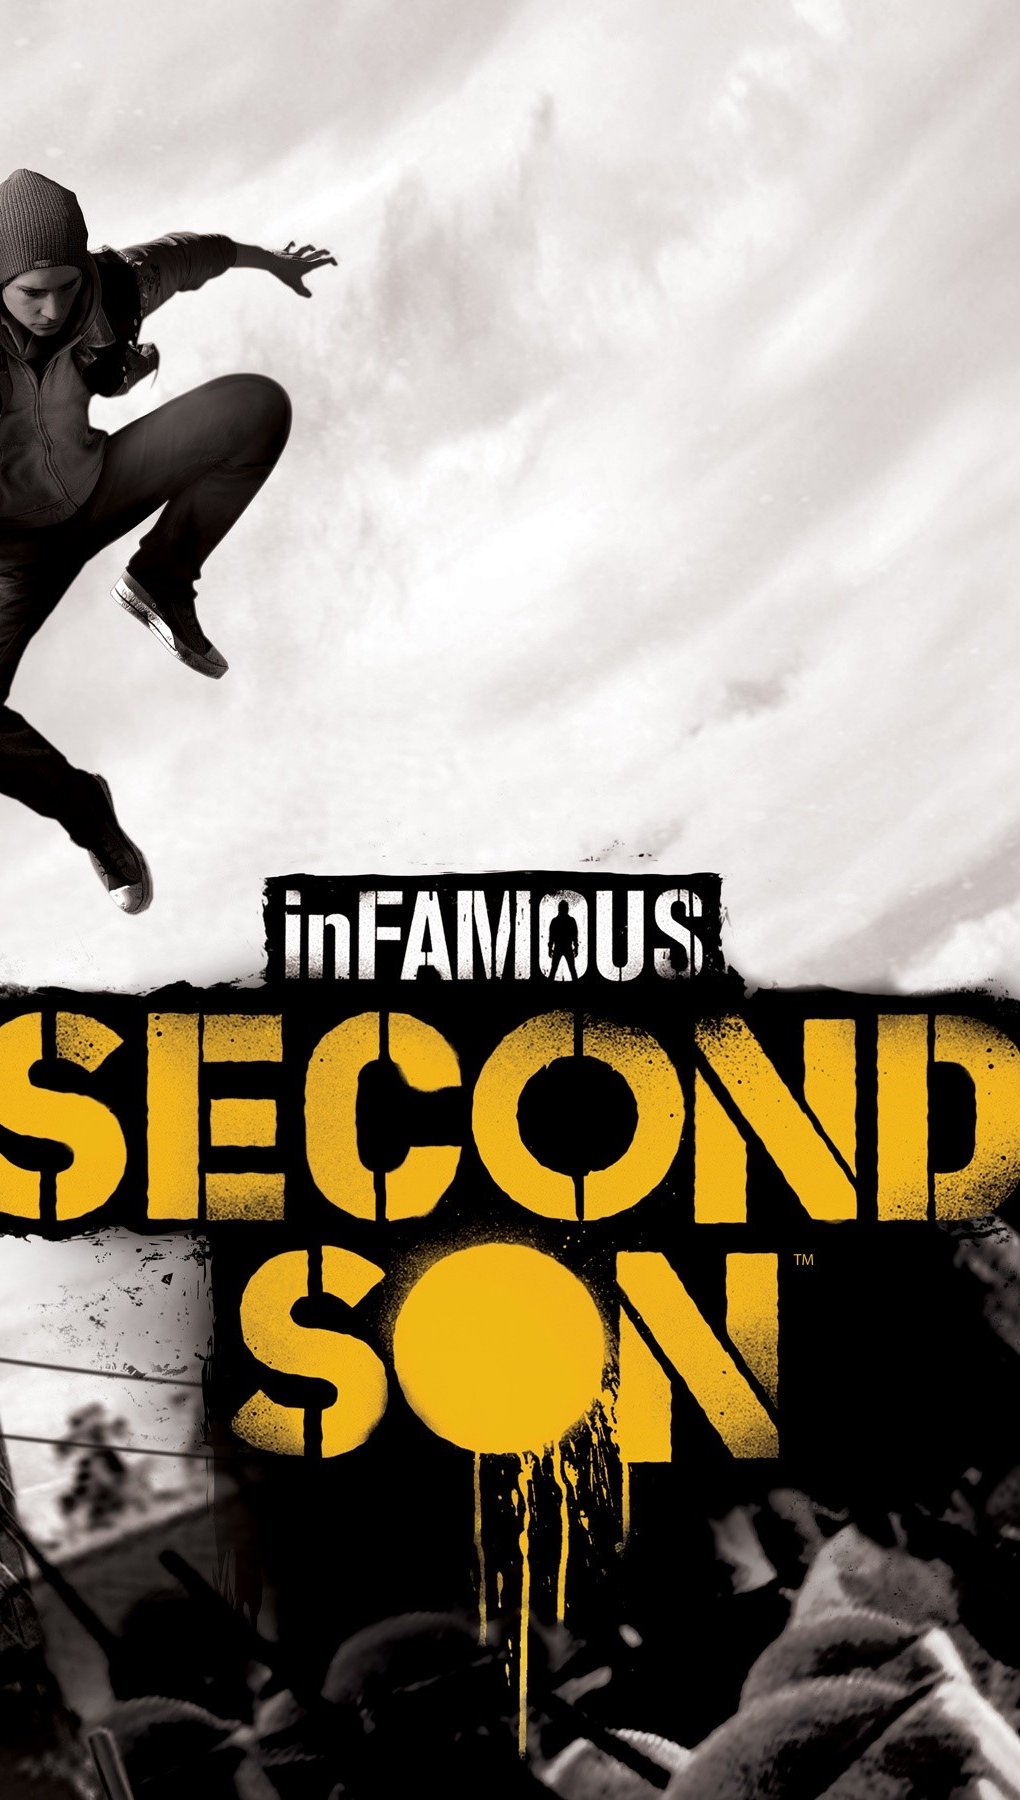 Infamous Second Son Wallpaper ID:1055